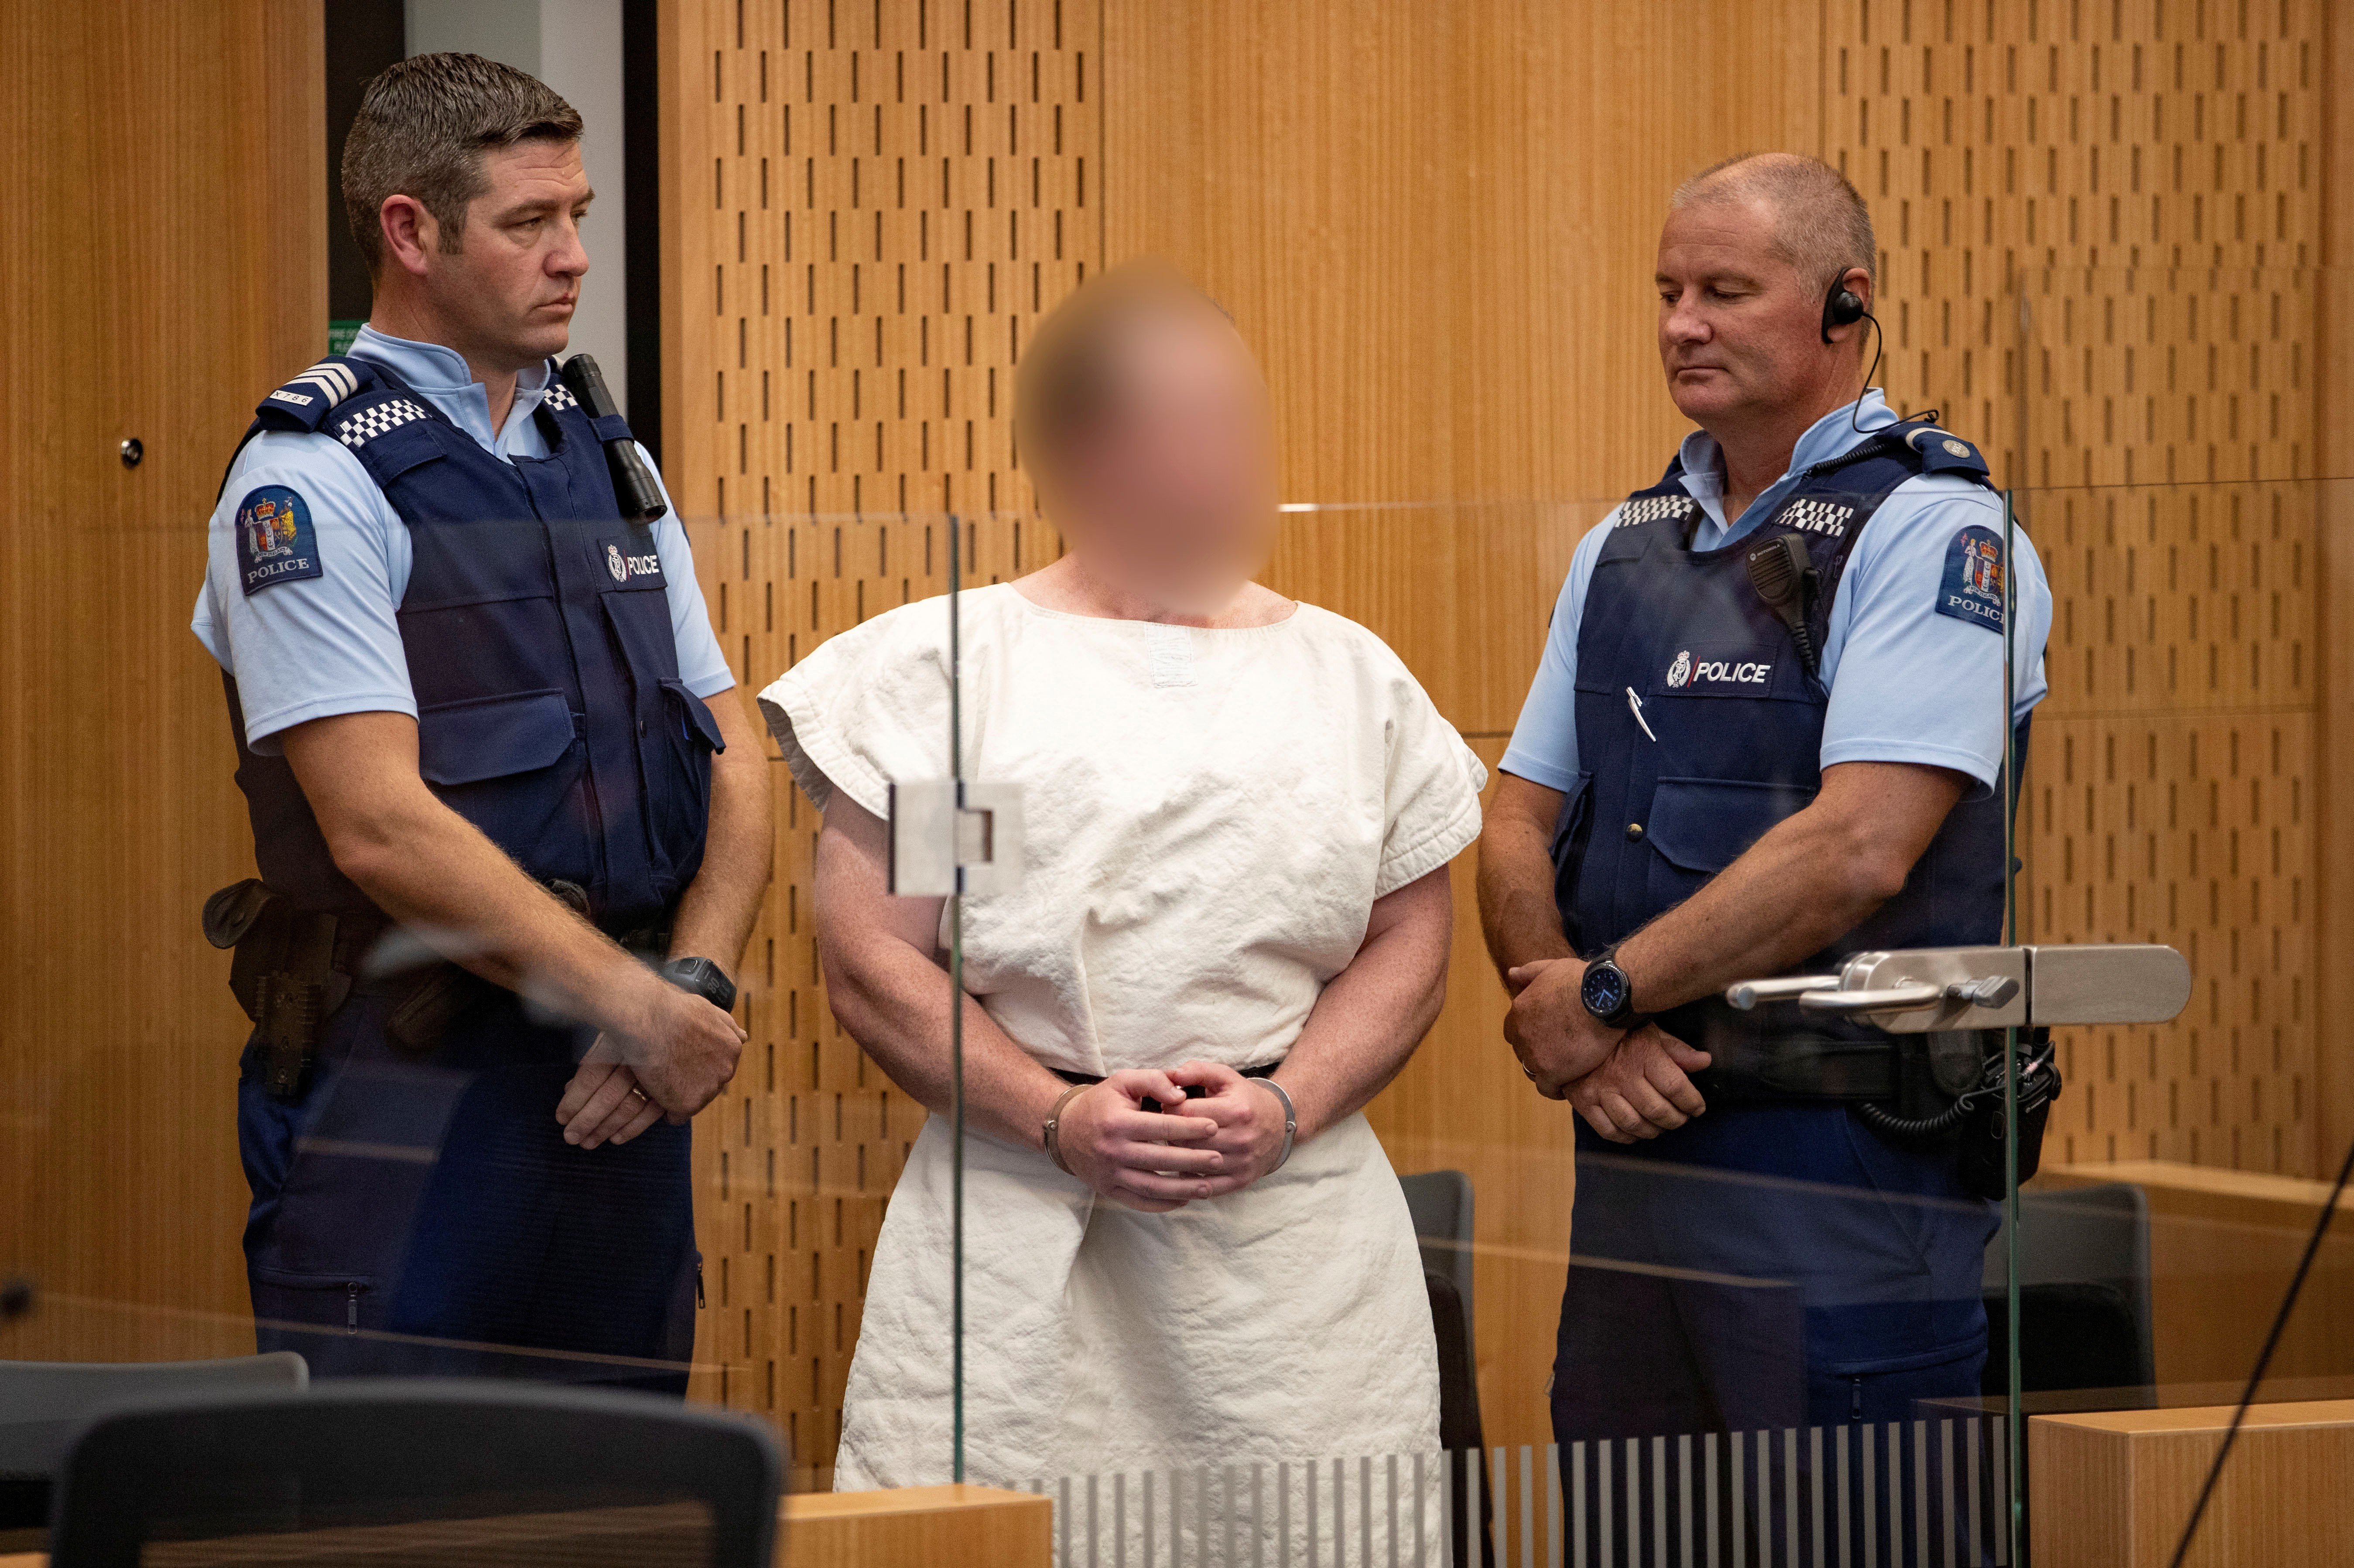 Brenton Tarrant, charged for murder in relation to the mosque attacks. Photo: Pool via Reuters